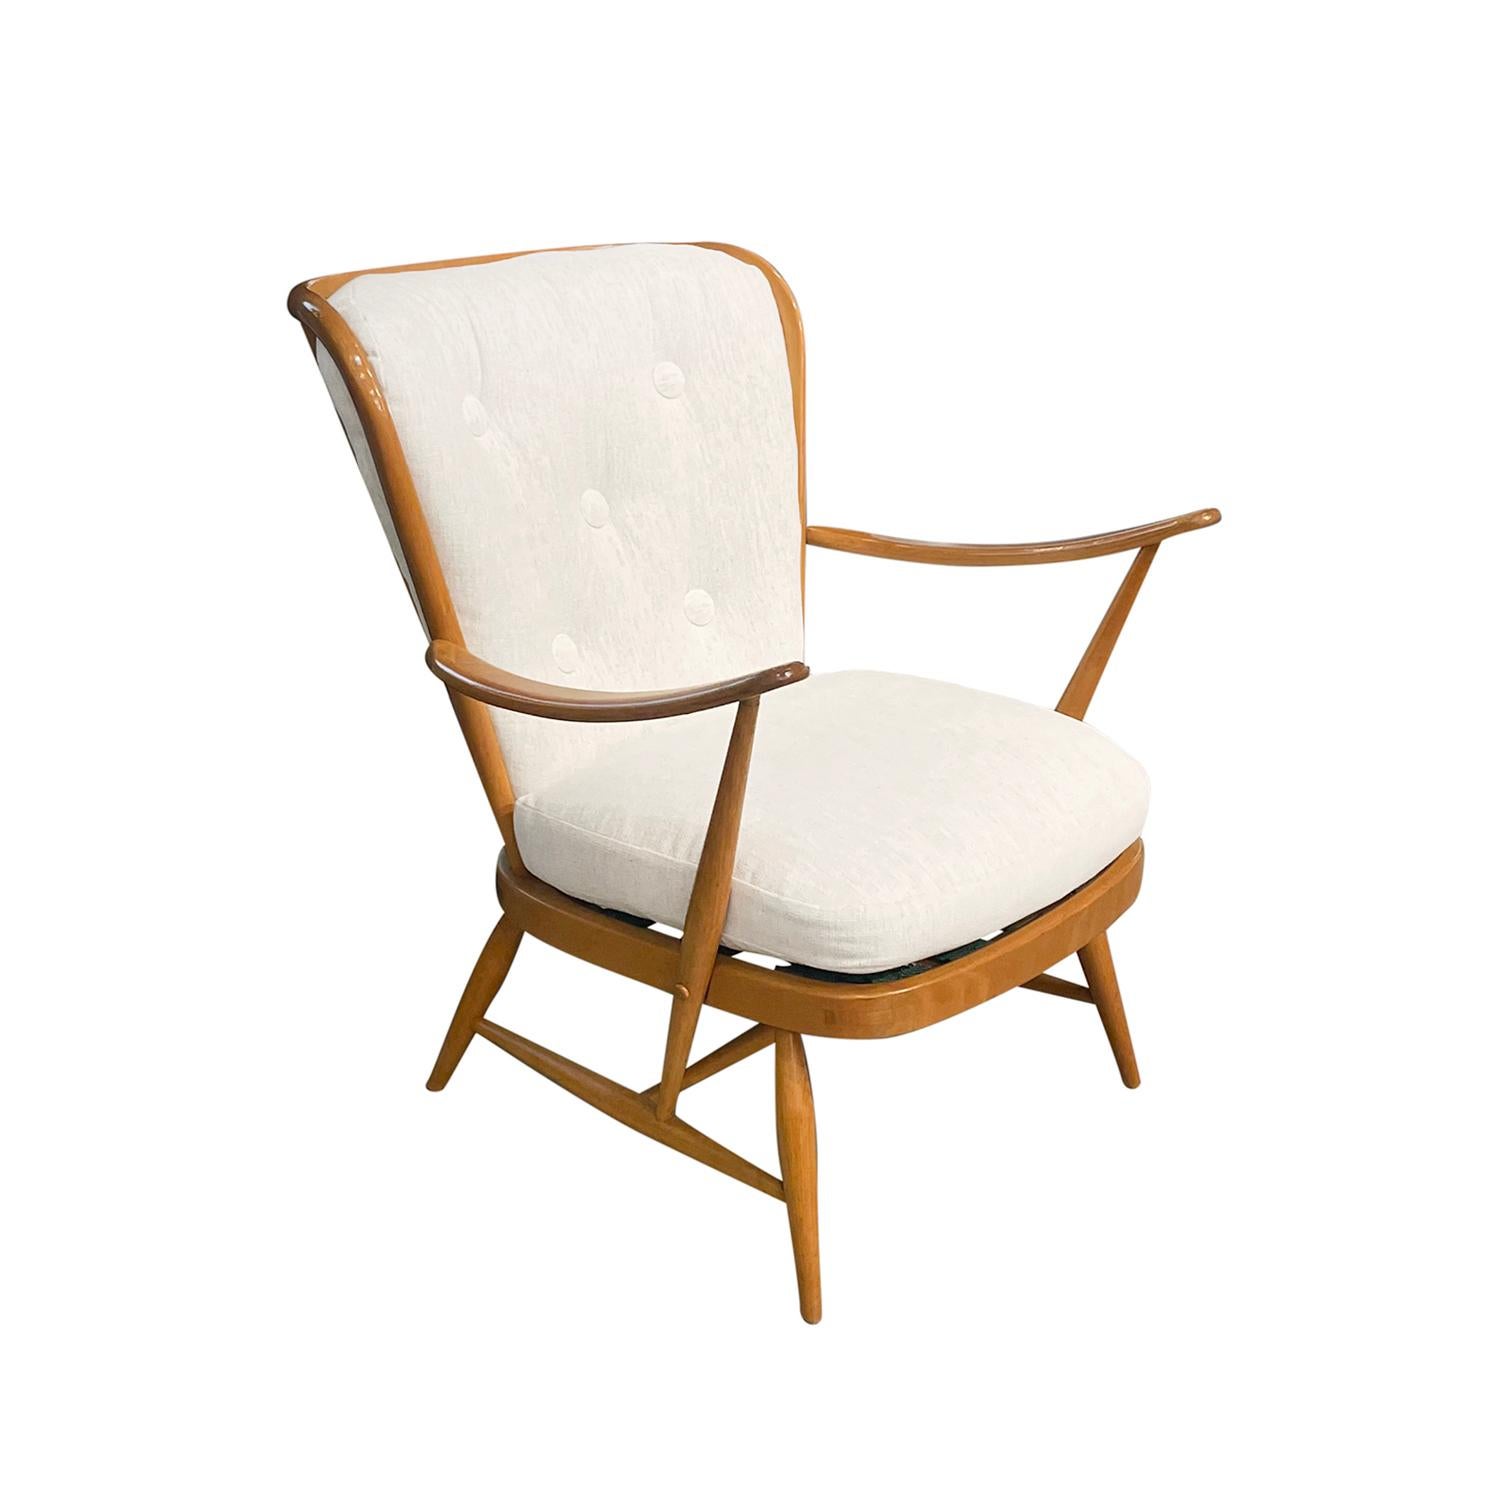 Hand-Carved 20th Century English Modern Beechwood Armchair - Single Vintage Side Chair For Sale